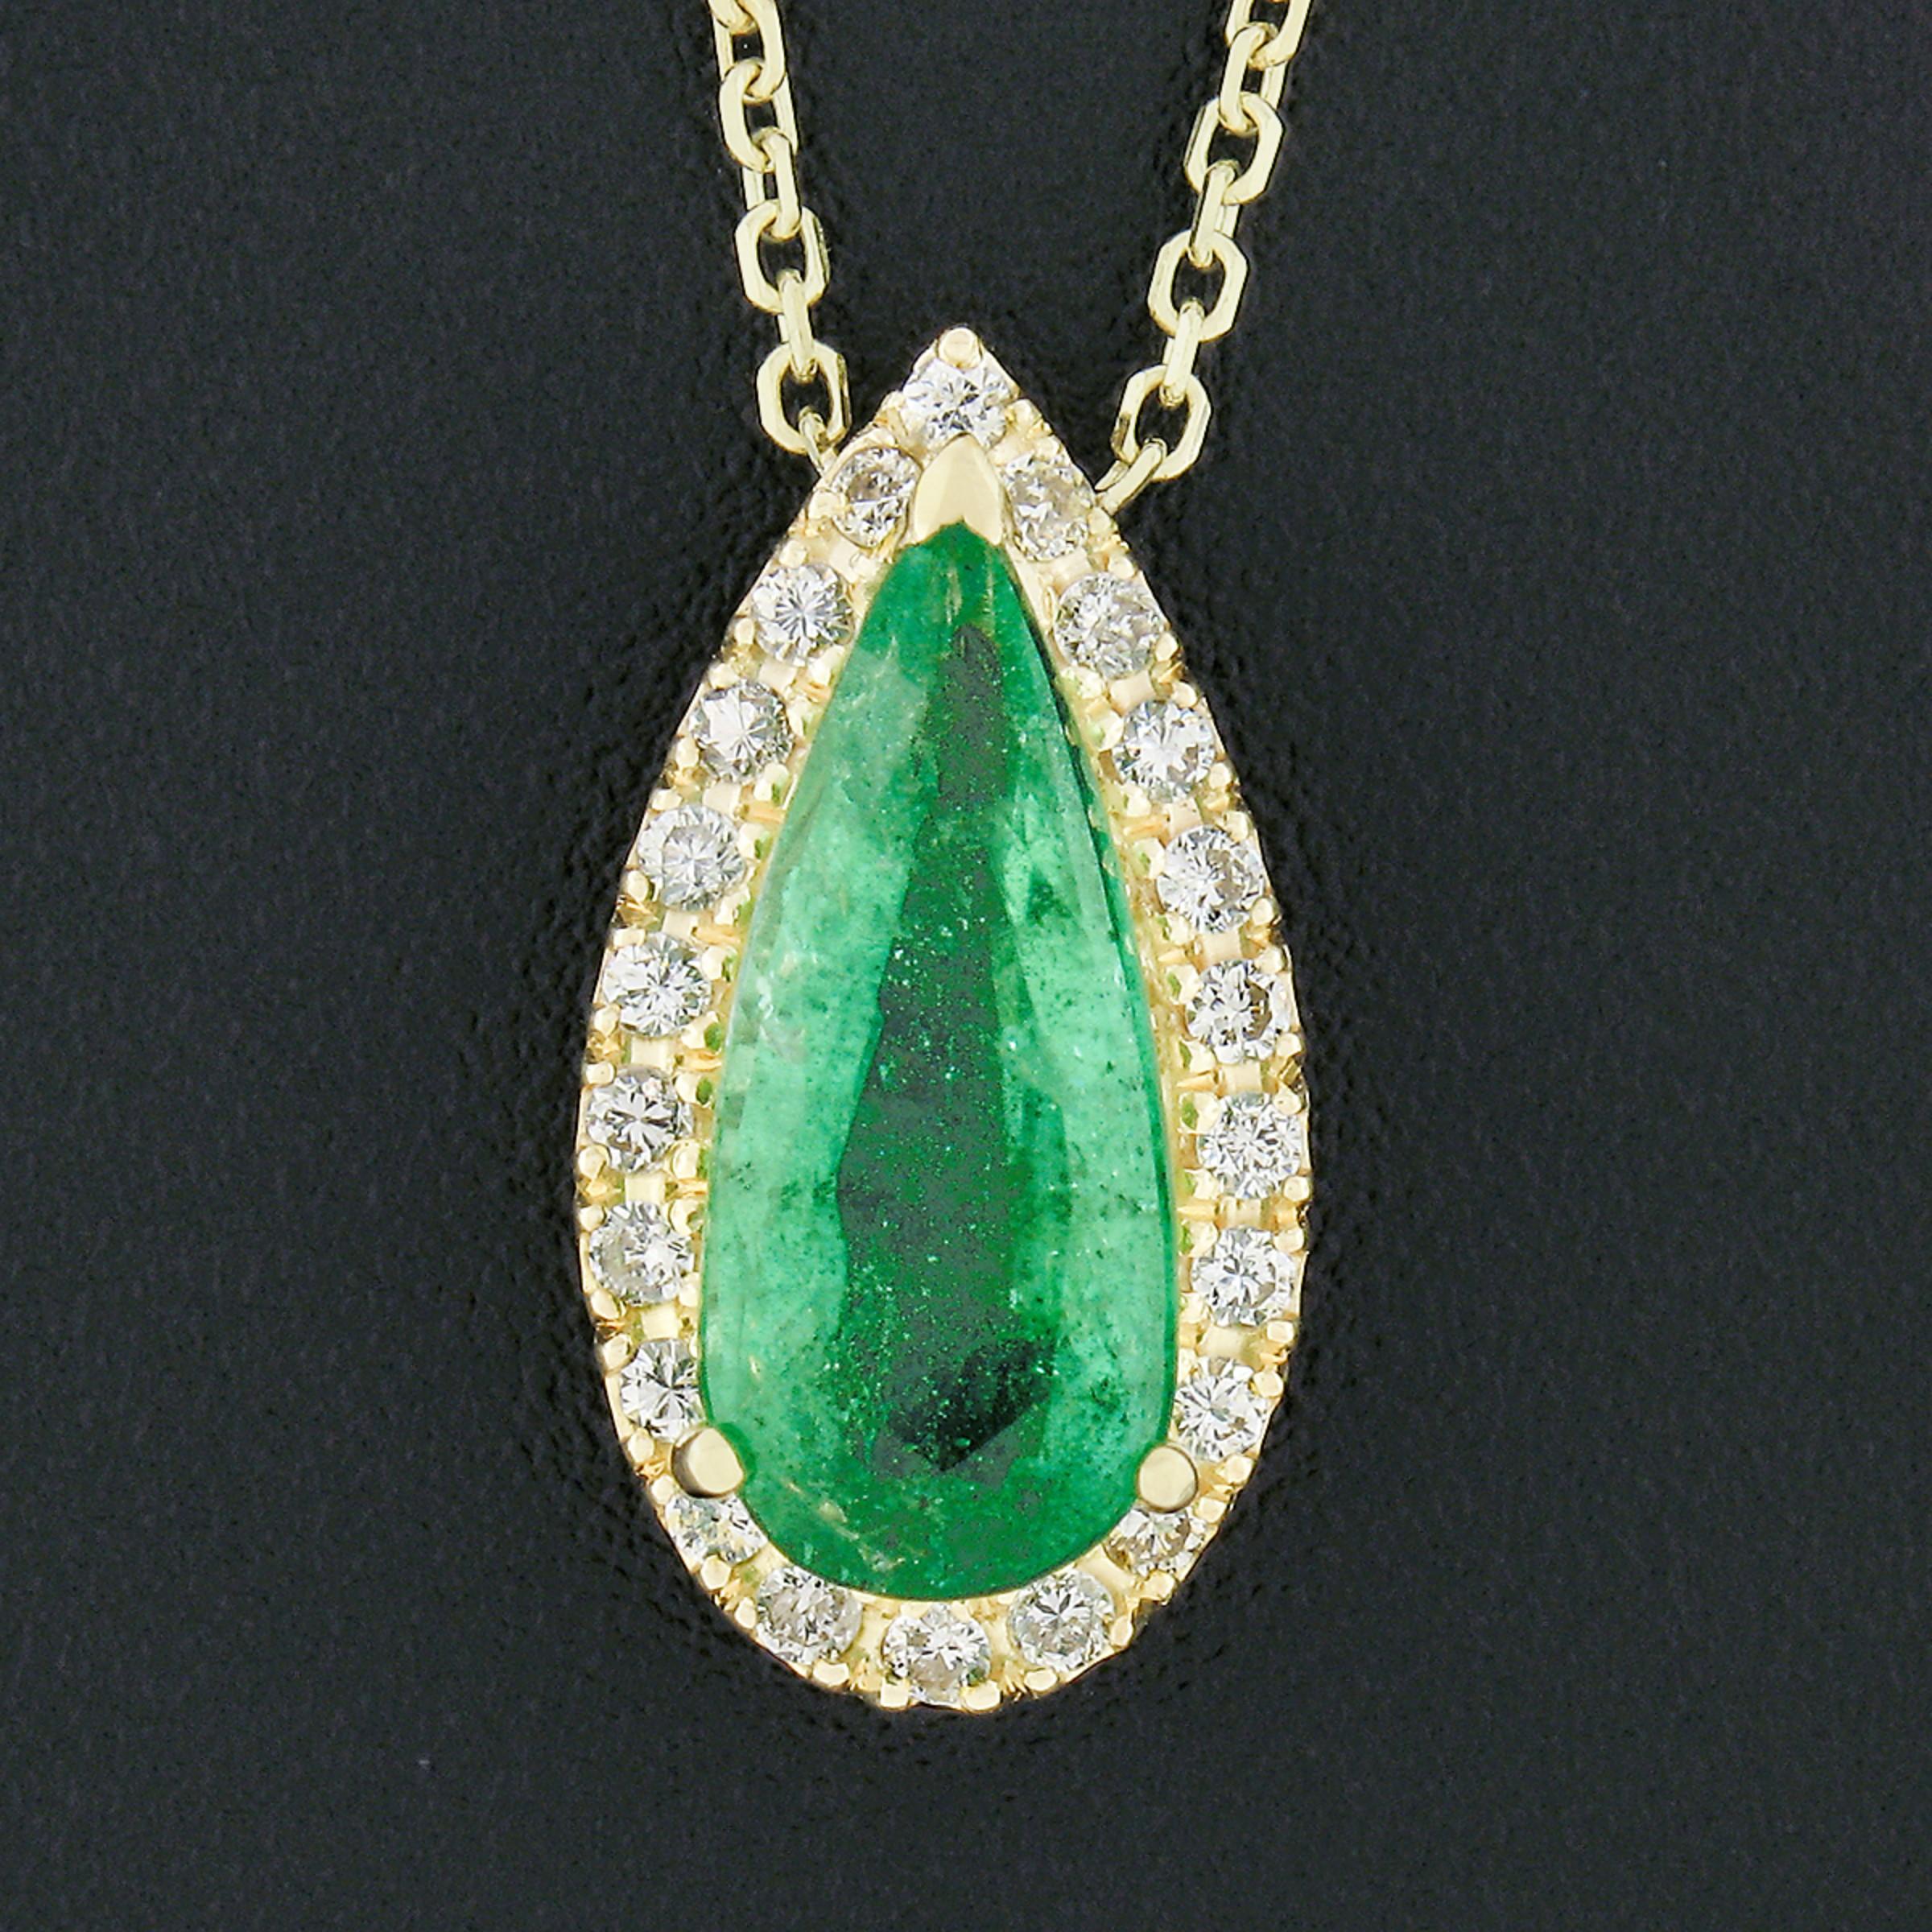 This gorgeous pendant necklace is crafted in solid 18k yellow gold and features an elongated tear drop design set with a fine emerald solitaire and diamond halo. The center carries the neatly set elongated pear cut emerald that shows an attractive